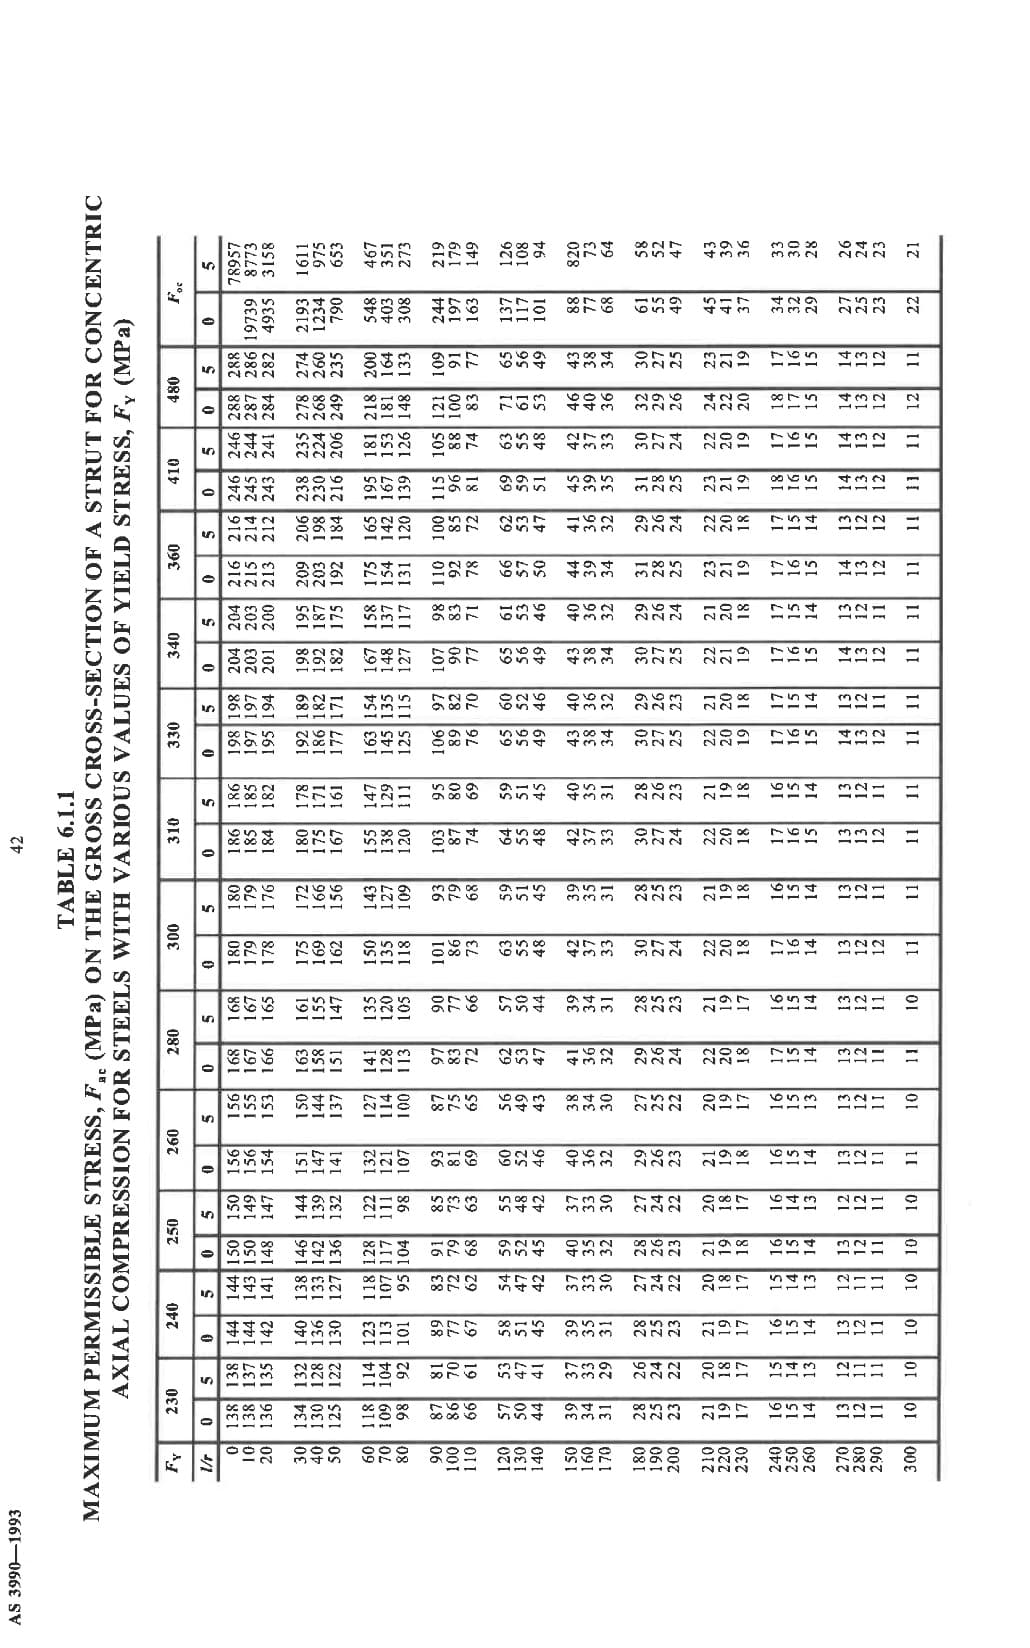 42
AS 3990—1993
TABLE 6.1.1
MAXIMUM PERMISSIBLE STRESS, F. (MPa) ON THE GROSS CROSS-SECTION OF A STRUT FOR CONCENTRIC
AXIAL COMPRESSION FOR STEELS WITH VARIOUS VALUES OF YIELD STRESS, Fy (MPa)
Foc
480
0 5
410
360
340
330
310
300
280
260
250
240
230
0
我
5
0
50 50
0
0 5
0 5
78957
3158
4935
244 287 286 19739 8773
4/1
874
文 000
50 5
204
|222 222
222
653
南南區
222
642
222
198 198 204
网75
653
inin in
153
1611
975
790 653
442
358735
886
222
92 86 77
RNG
626
195 181 218 200
137 154 142 167 153 181 164
165
54 35 18
52
40 6 30 23 13 1 89 77 7
55 51 45
1 36 32
544
5544
384
दलल
956
233
840
ليا تي في
544 3 33 30
الا ليا اسيا
33.3
739
332
941
333
ន
29 26 24
1825
52
322
863
NNN
853
222
30 25 24
222
863
222
2
∞053
25 25 25
420 875
儿沉Z
23 21 19
22 21 19
2 70 19
ANE
119 18
888
198
765
211
NNN
--
765 4312
865
754
765
754
19
151
765
654
27523 22
432 n
---
654
322
432
654 321
Ell
13312 H
321
等方面
321
12
321
322
---
754 321
643
654 3121
543
654
087 543
654
103
787
222 222
"
S
e
Ō